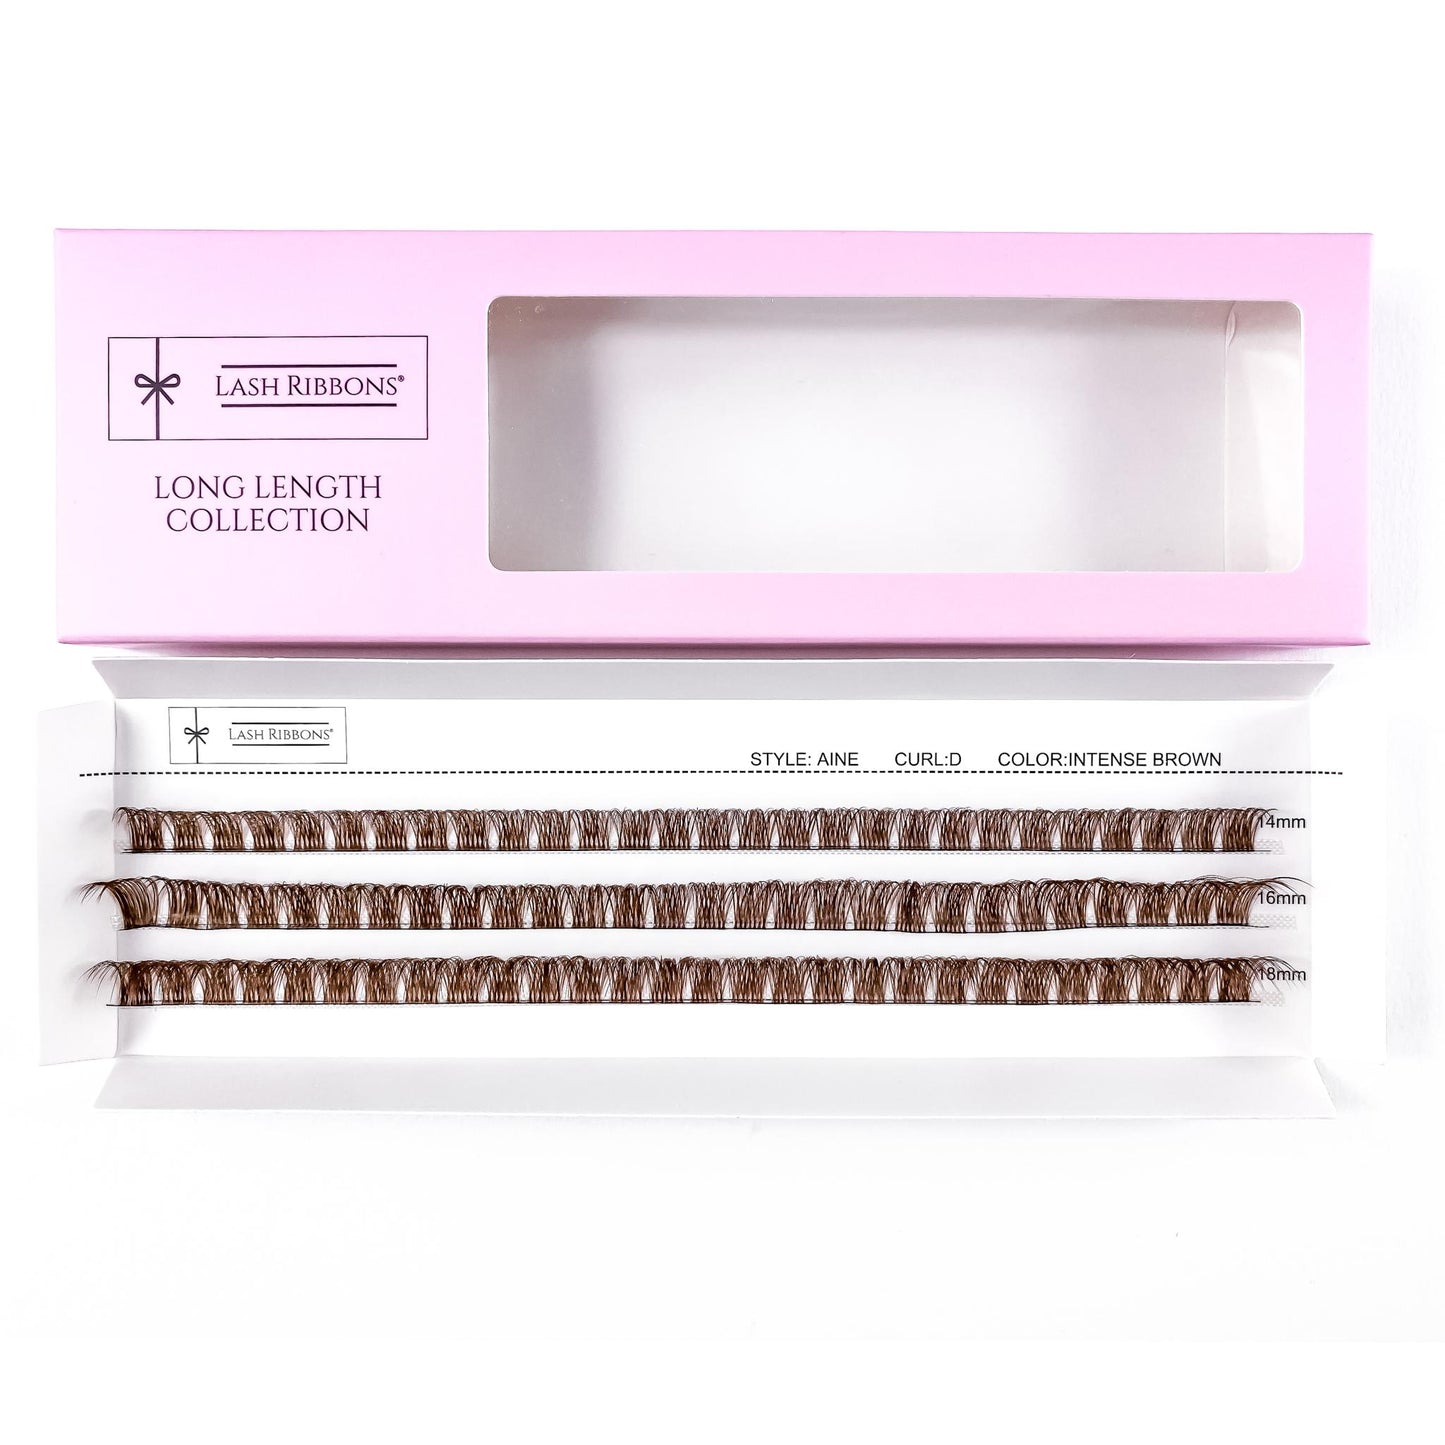 Collections Aine Lash Ribbons® Marron Intense